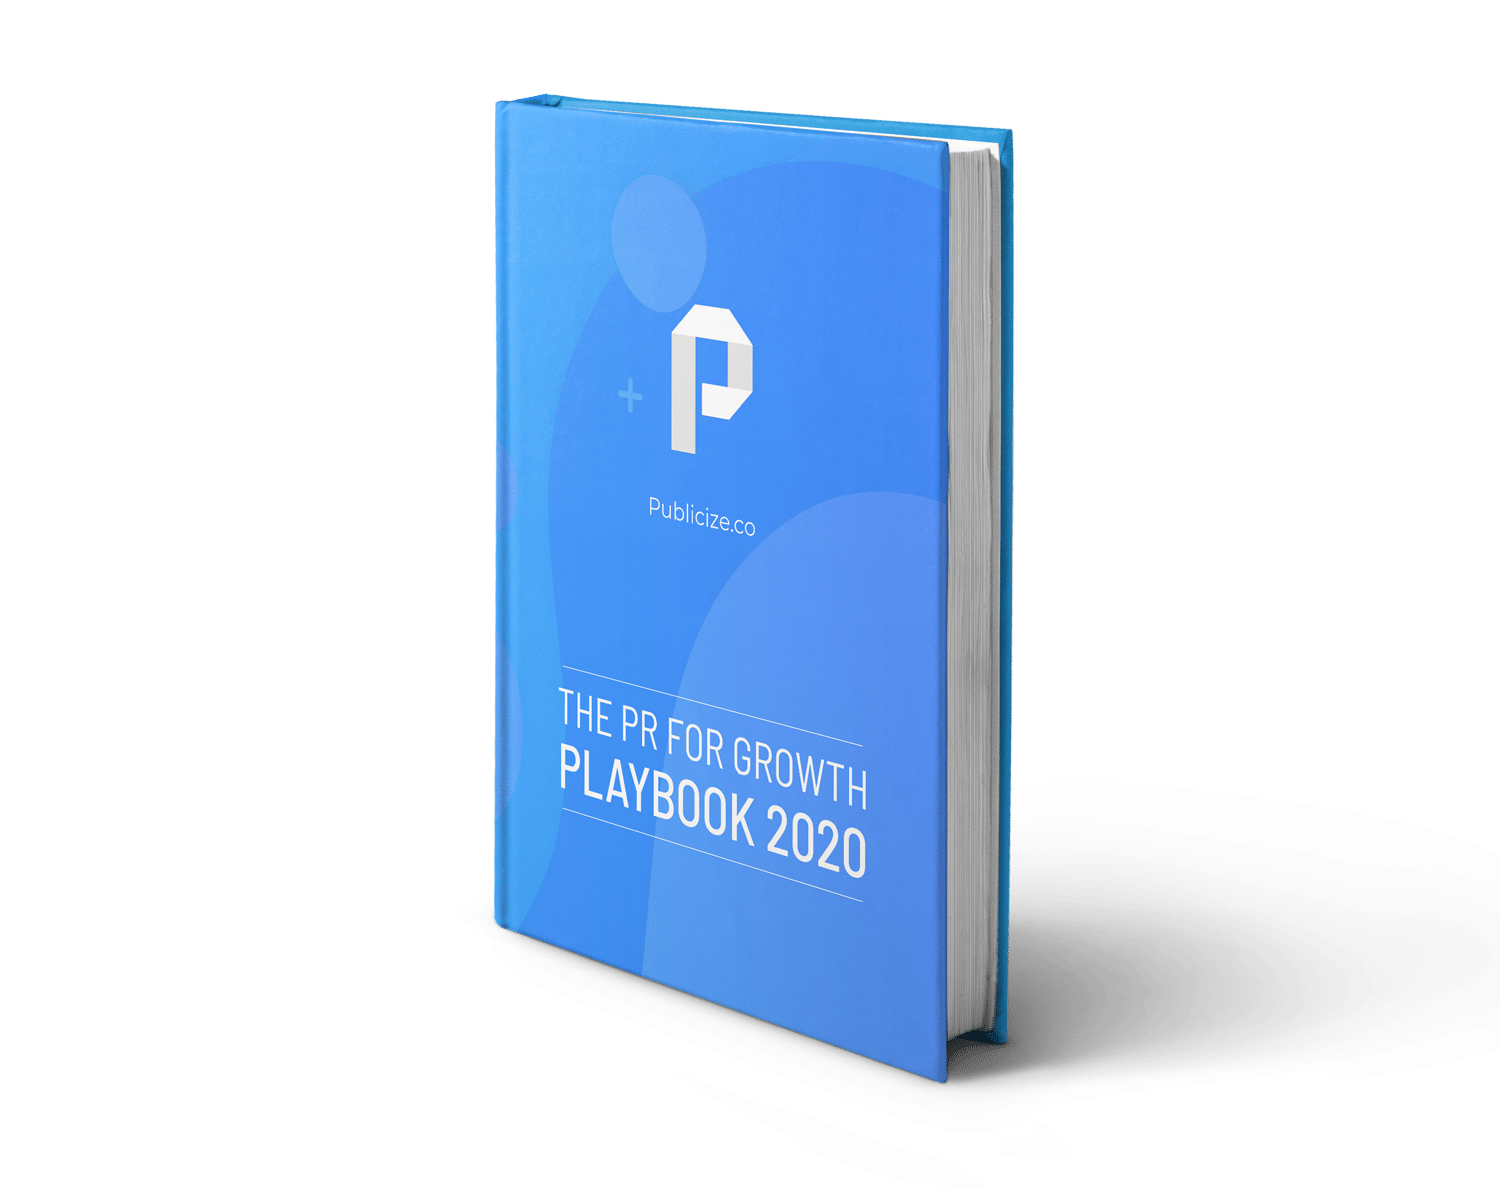 THE PR FOR GROWTH PLAYBOOK 2020 BOOK